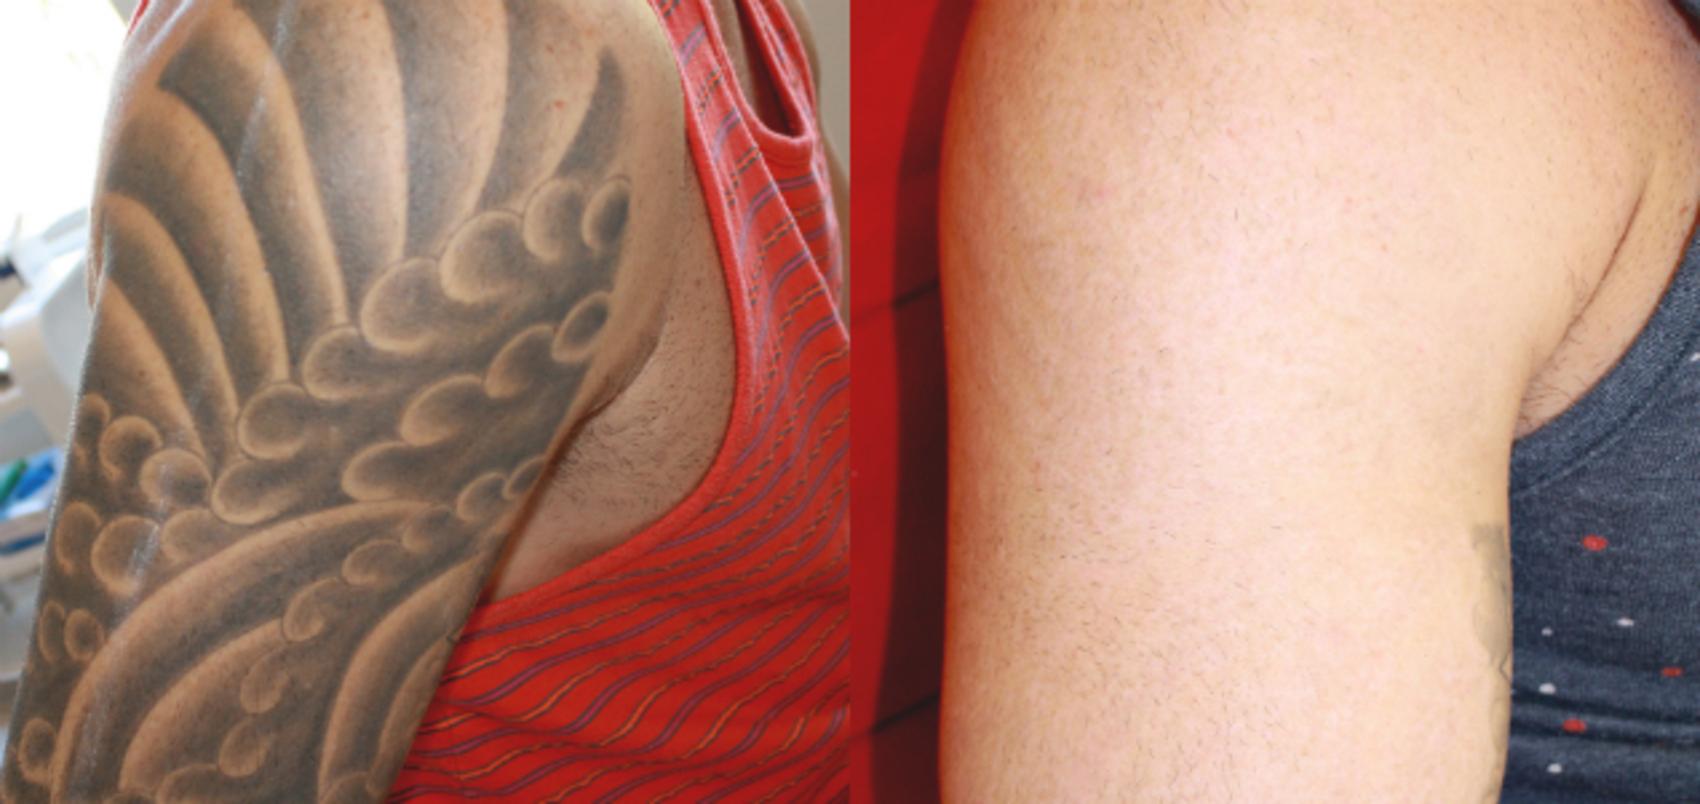 Tattoo Removal Laser Treatment Near Me | Dr Sin Yong